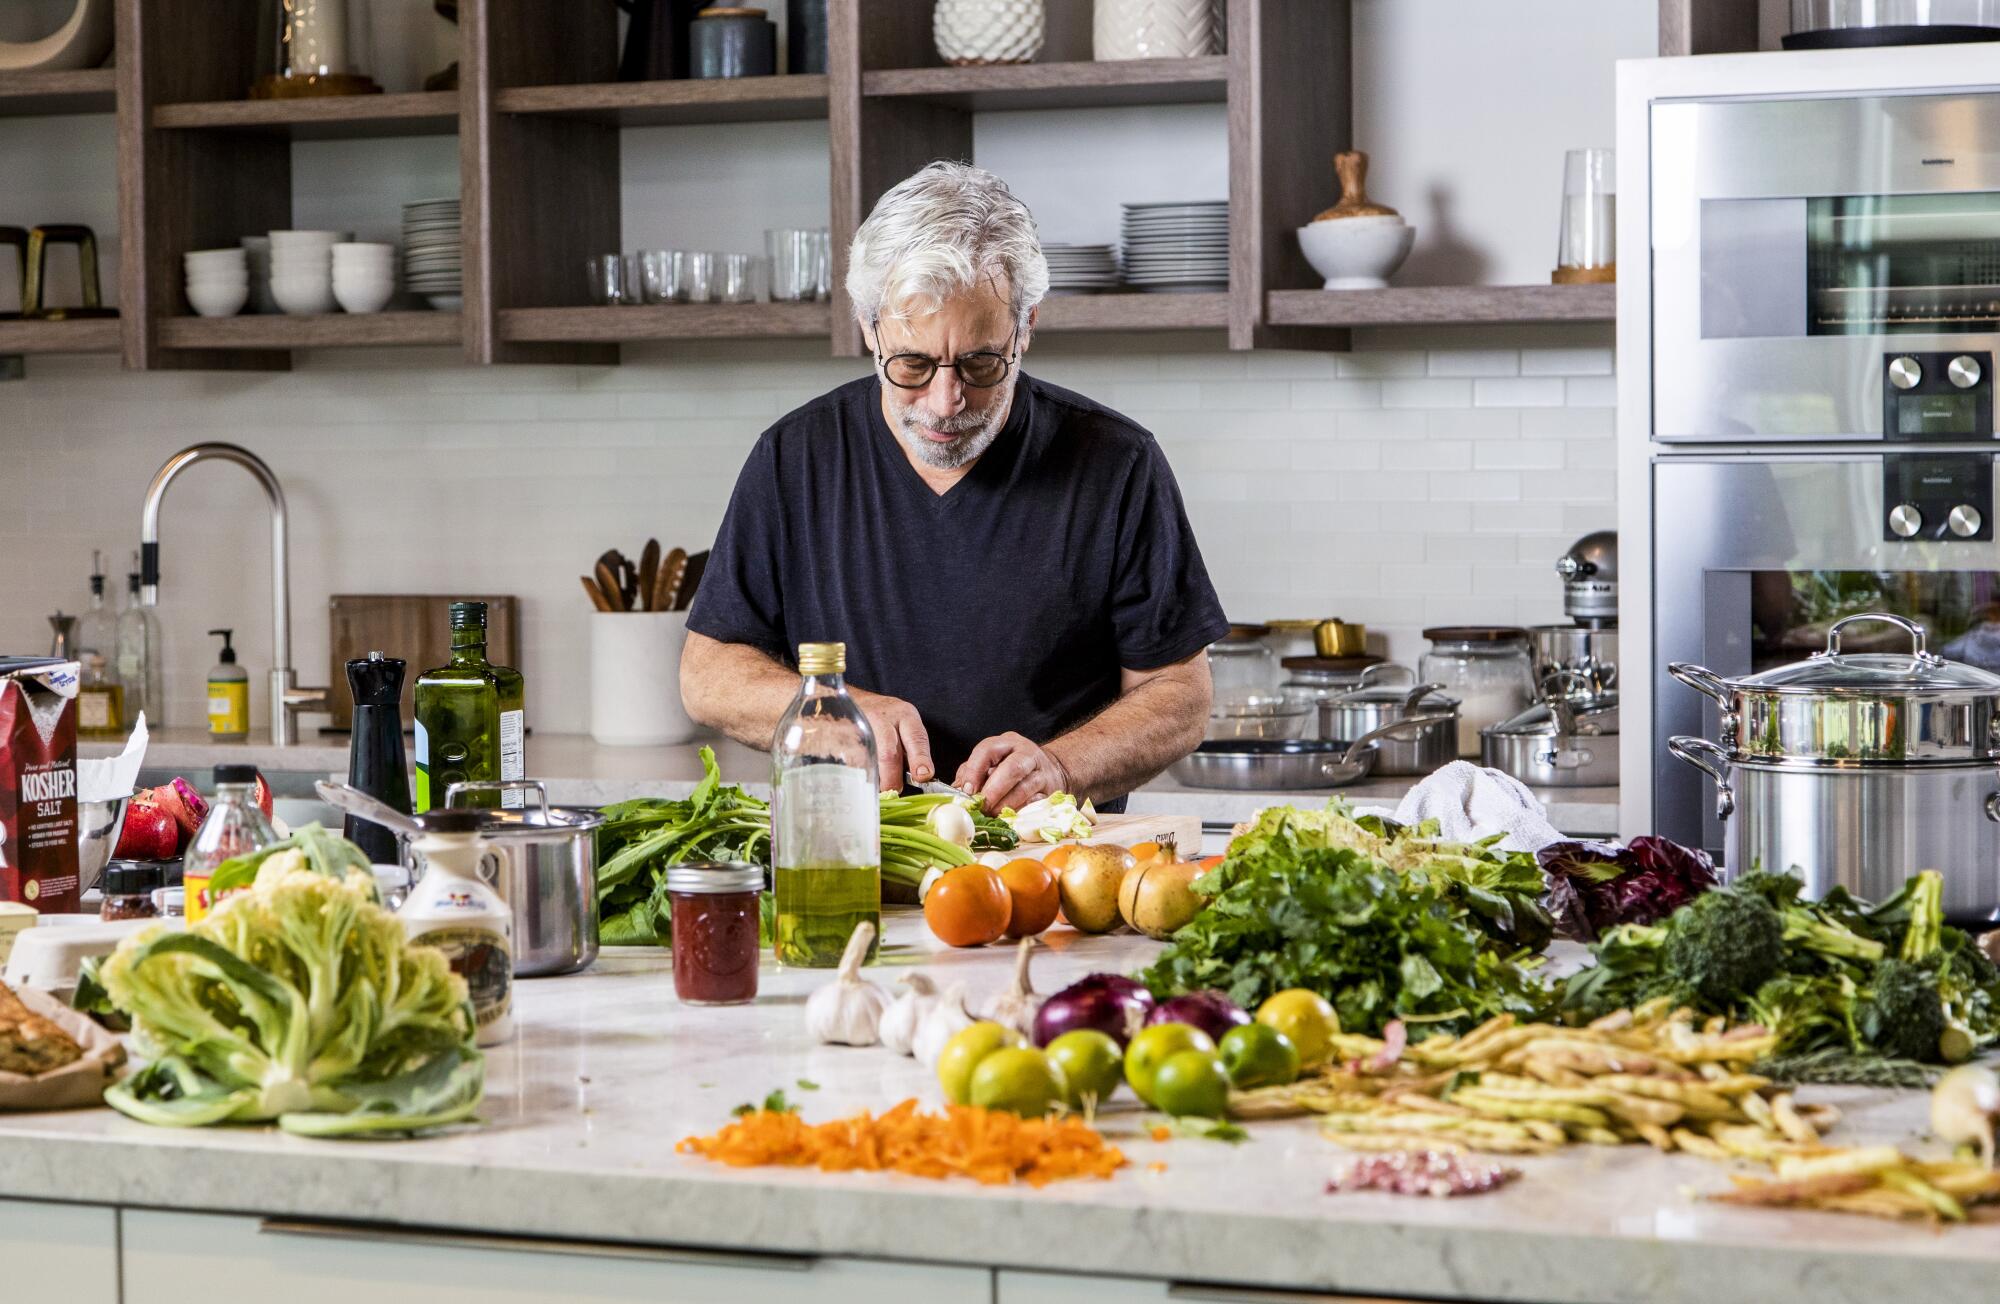 A man cuts vegetables on a kitchen island covered in vegetables.